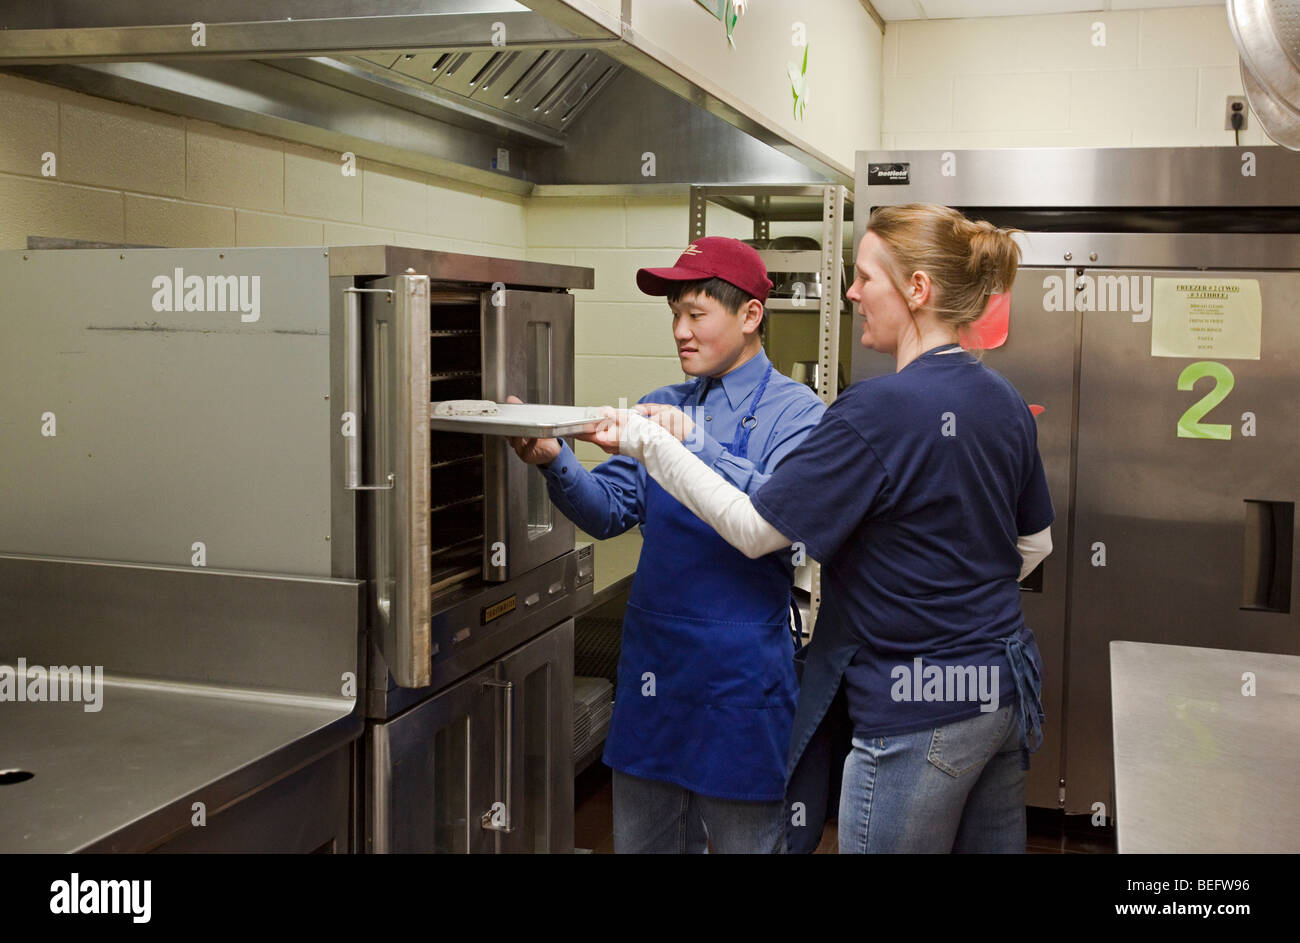 Developmentally Disabled Students in Food Preparation Class at Public School Stock Photo